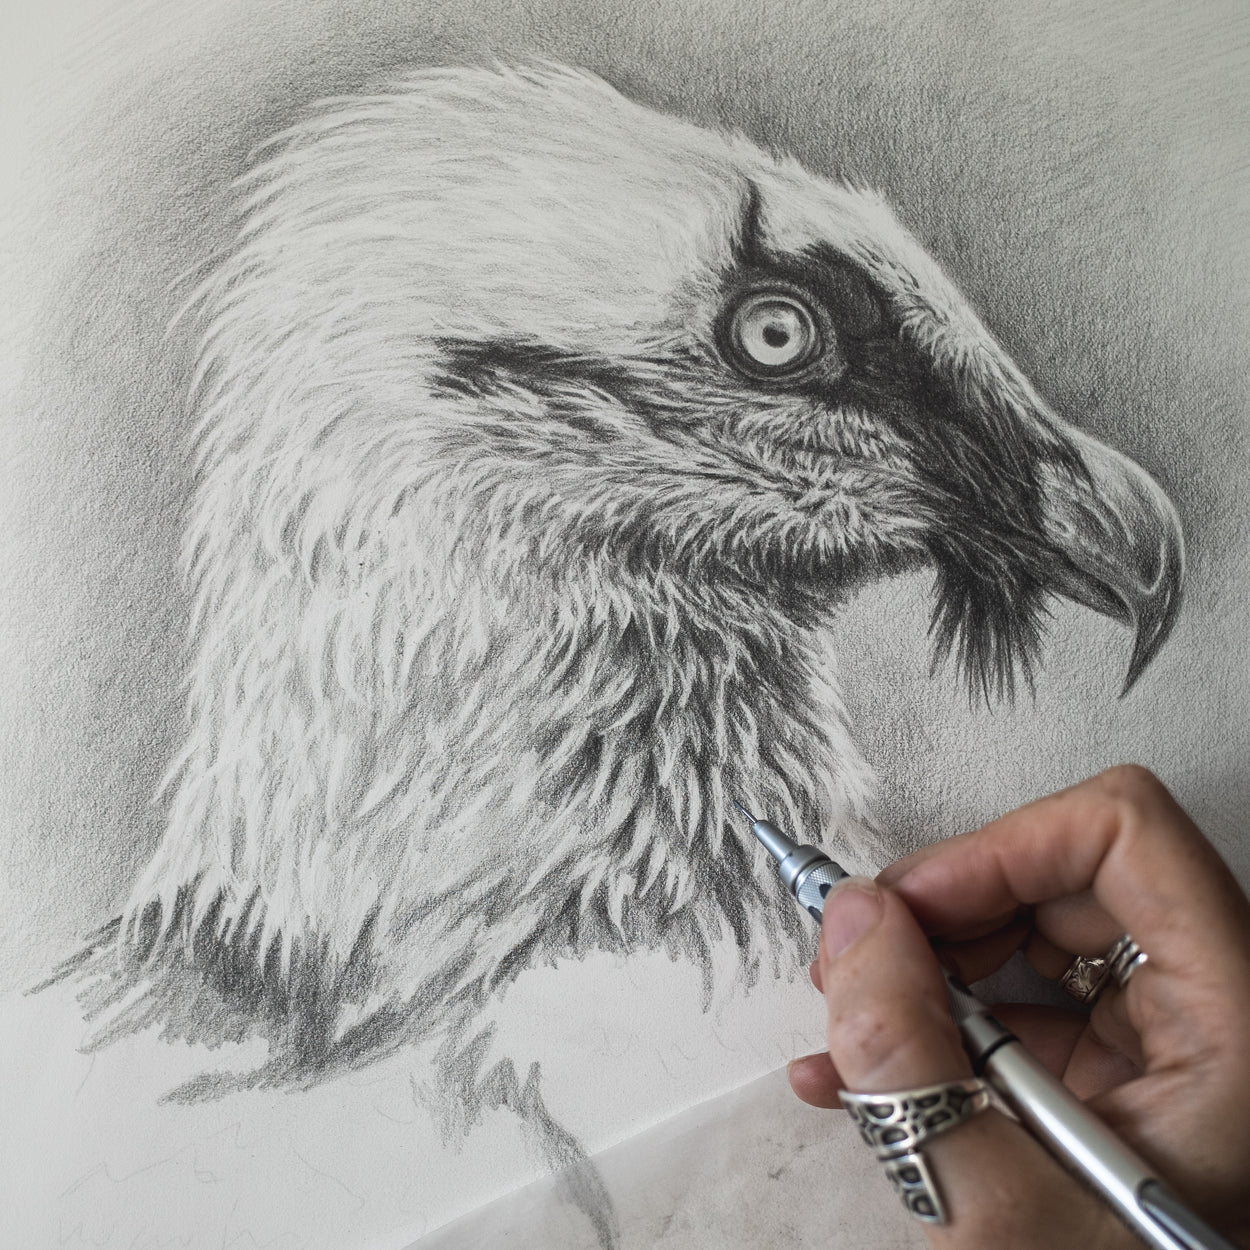 Bearded Vulture Work in Progress - The Thriving Wild